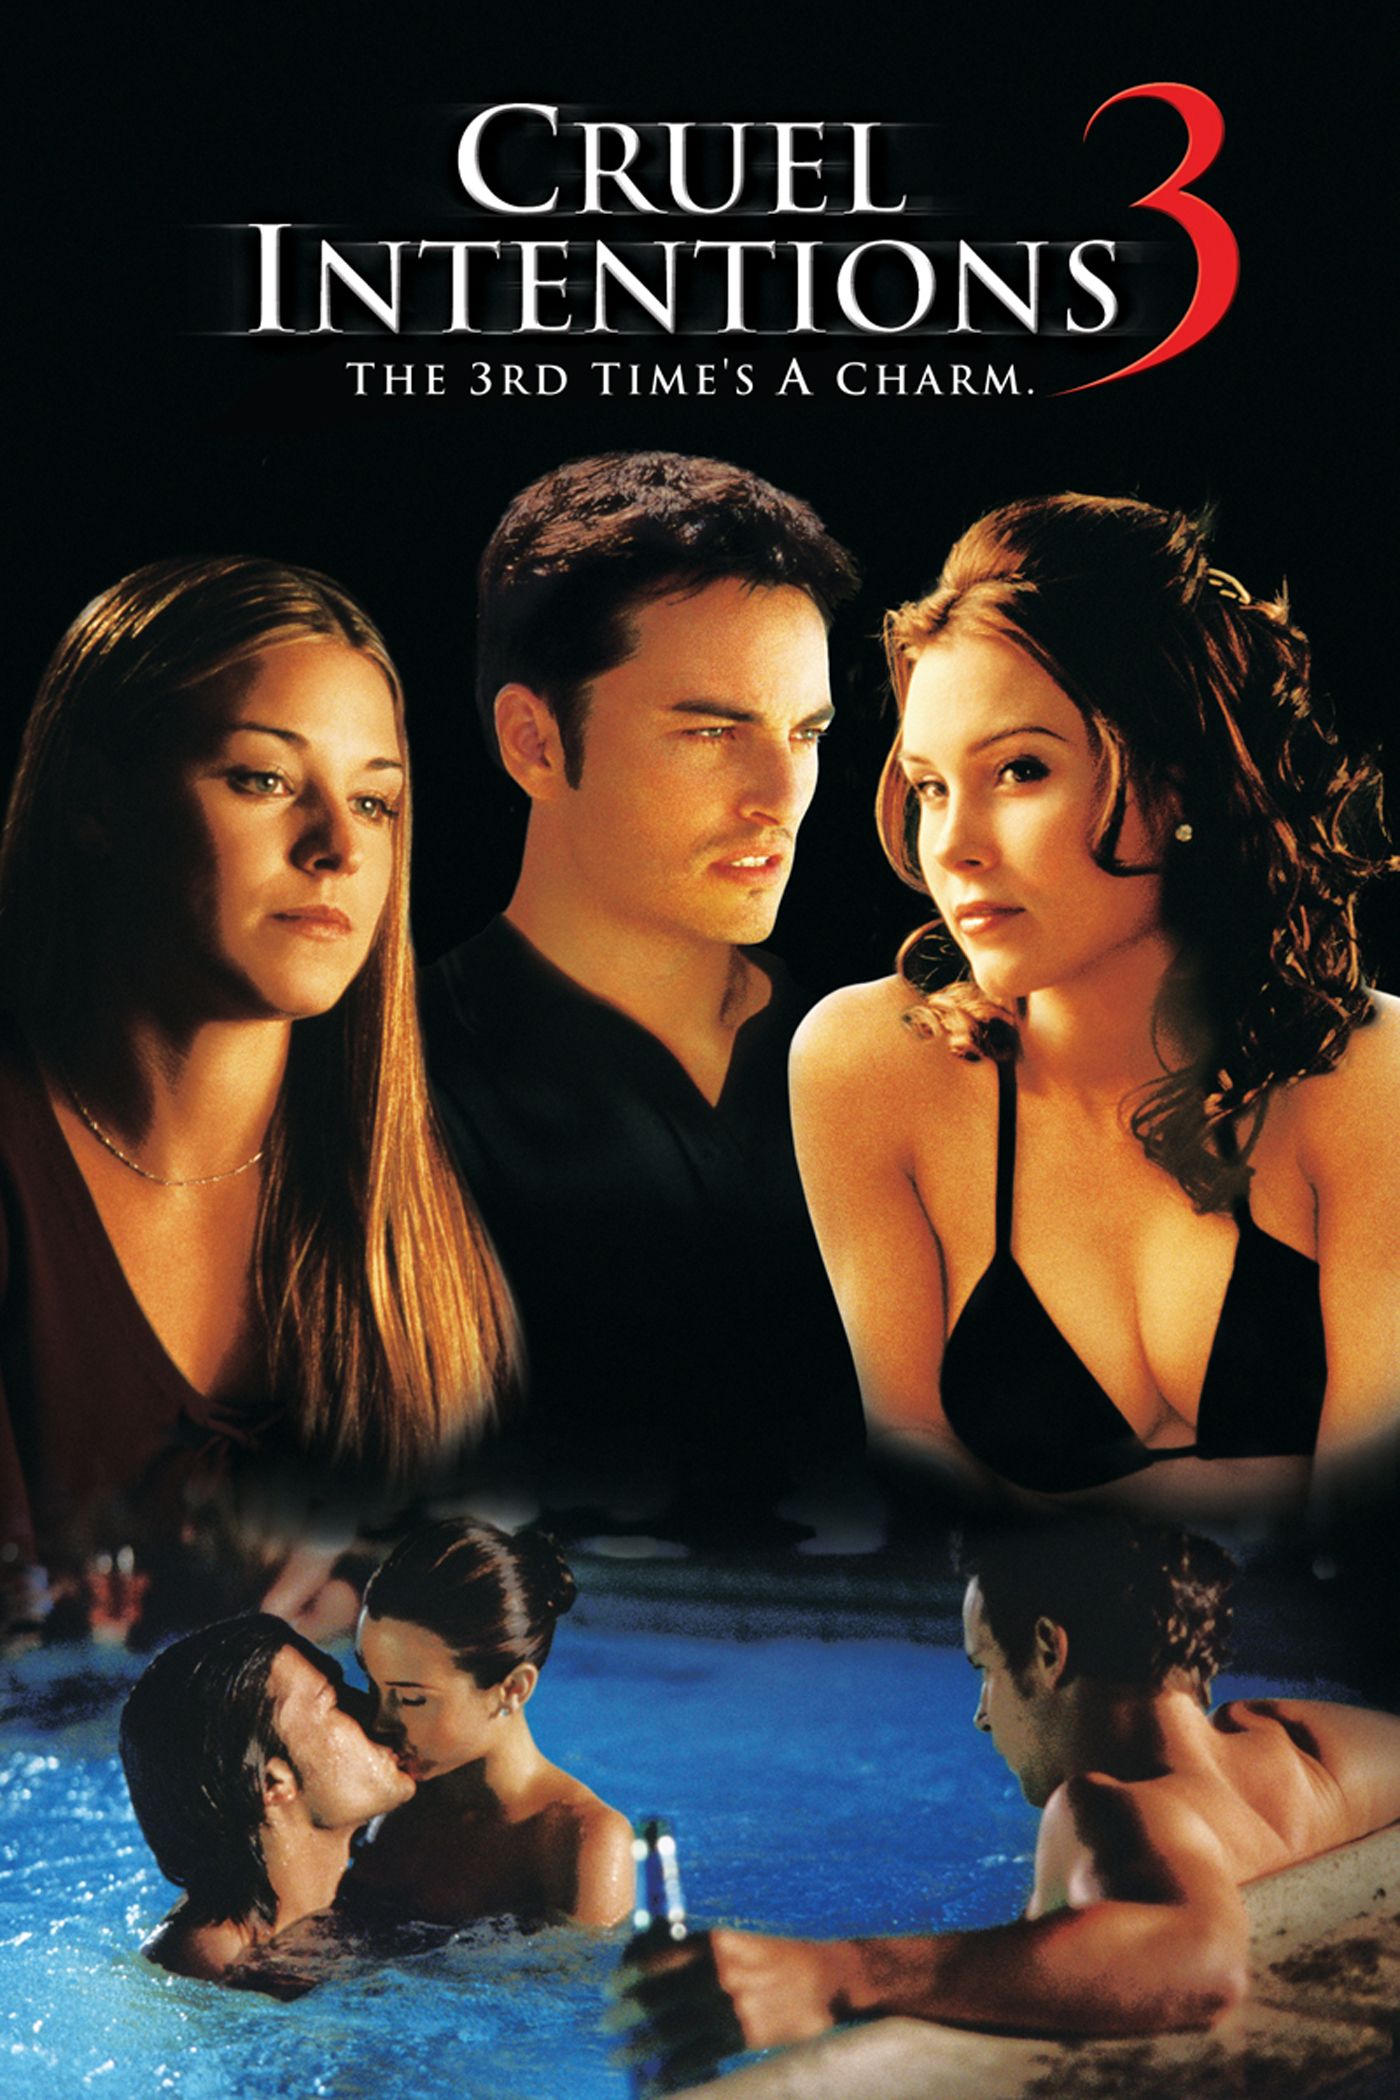 amber kehn recommends cruel intentions full movie online free pic